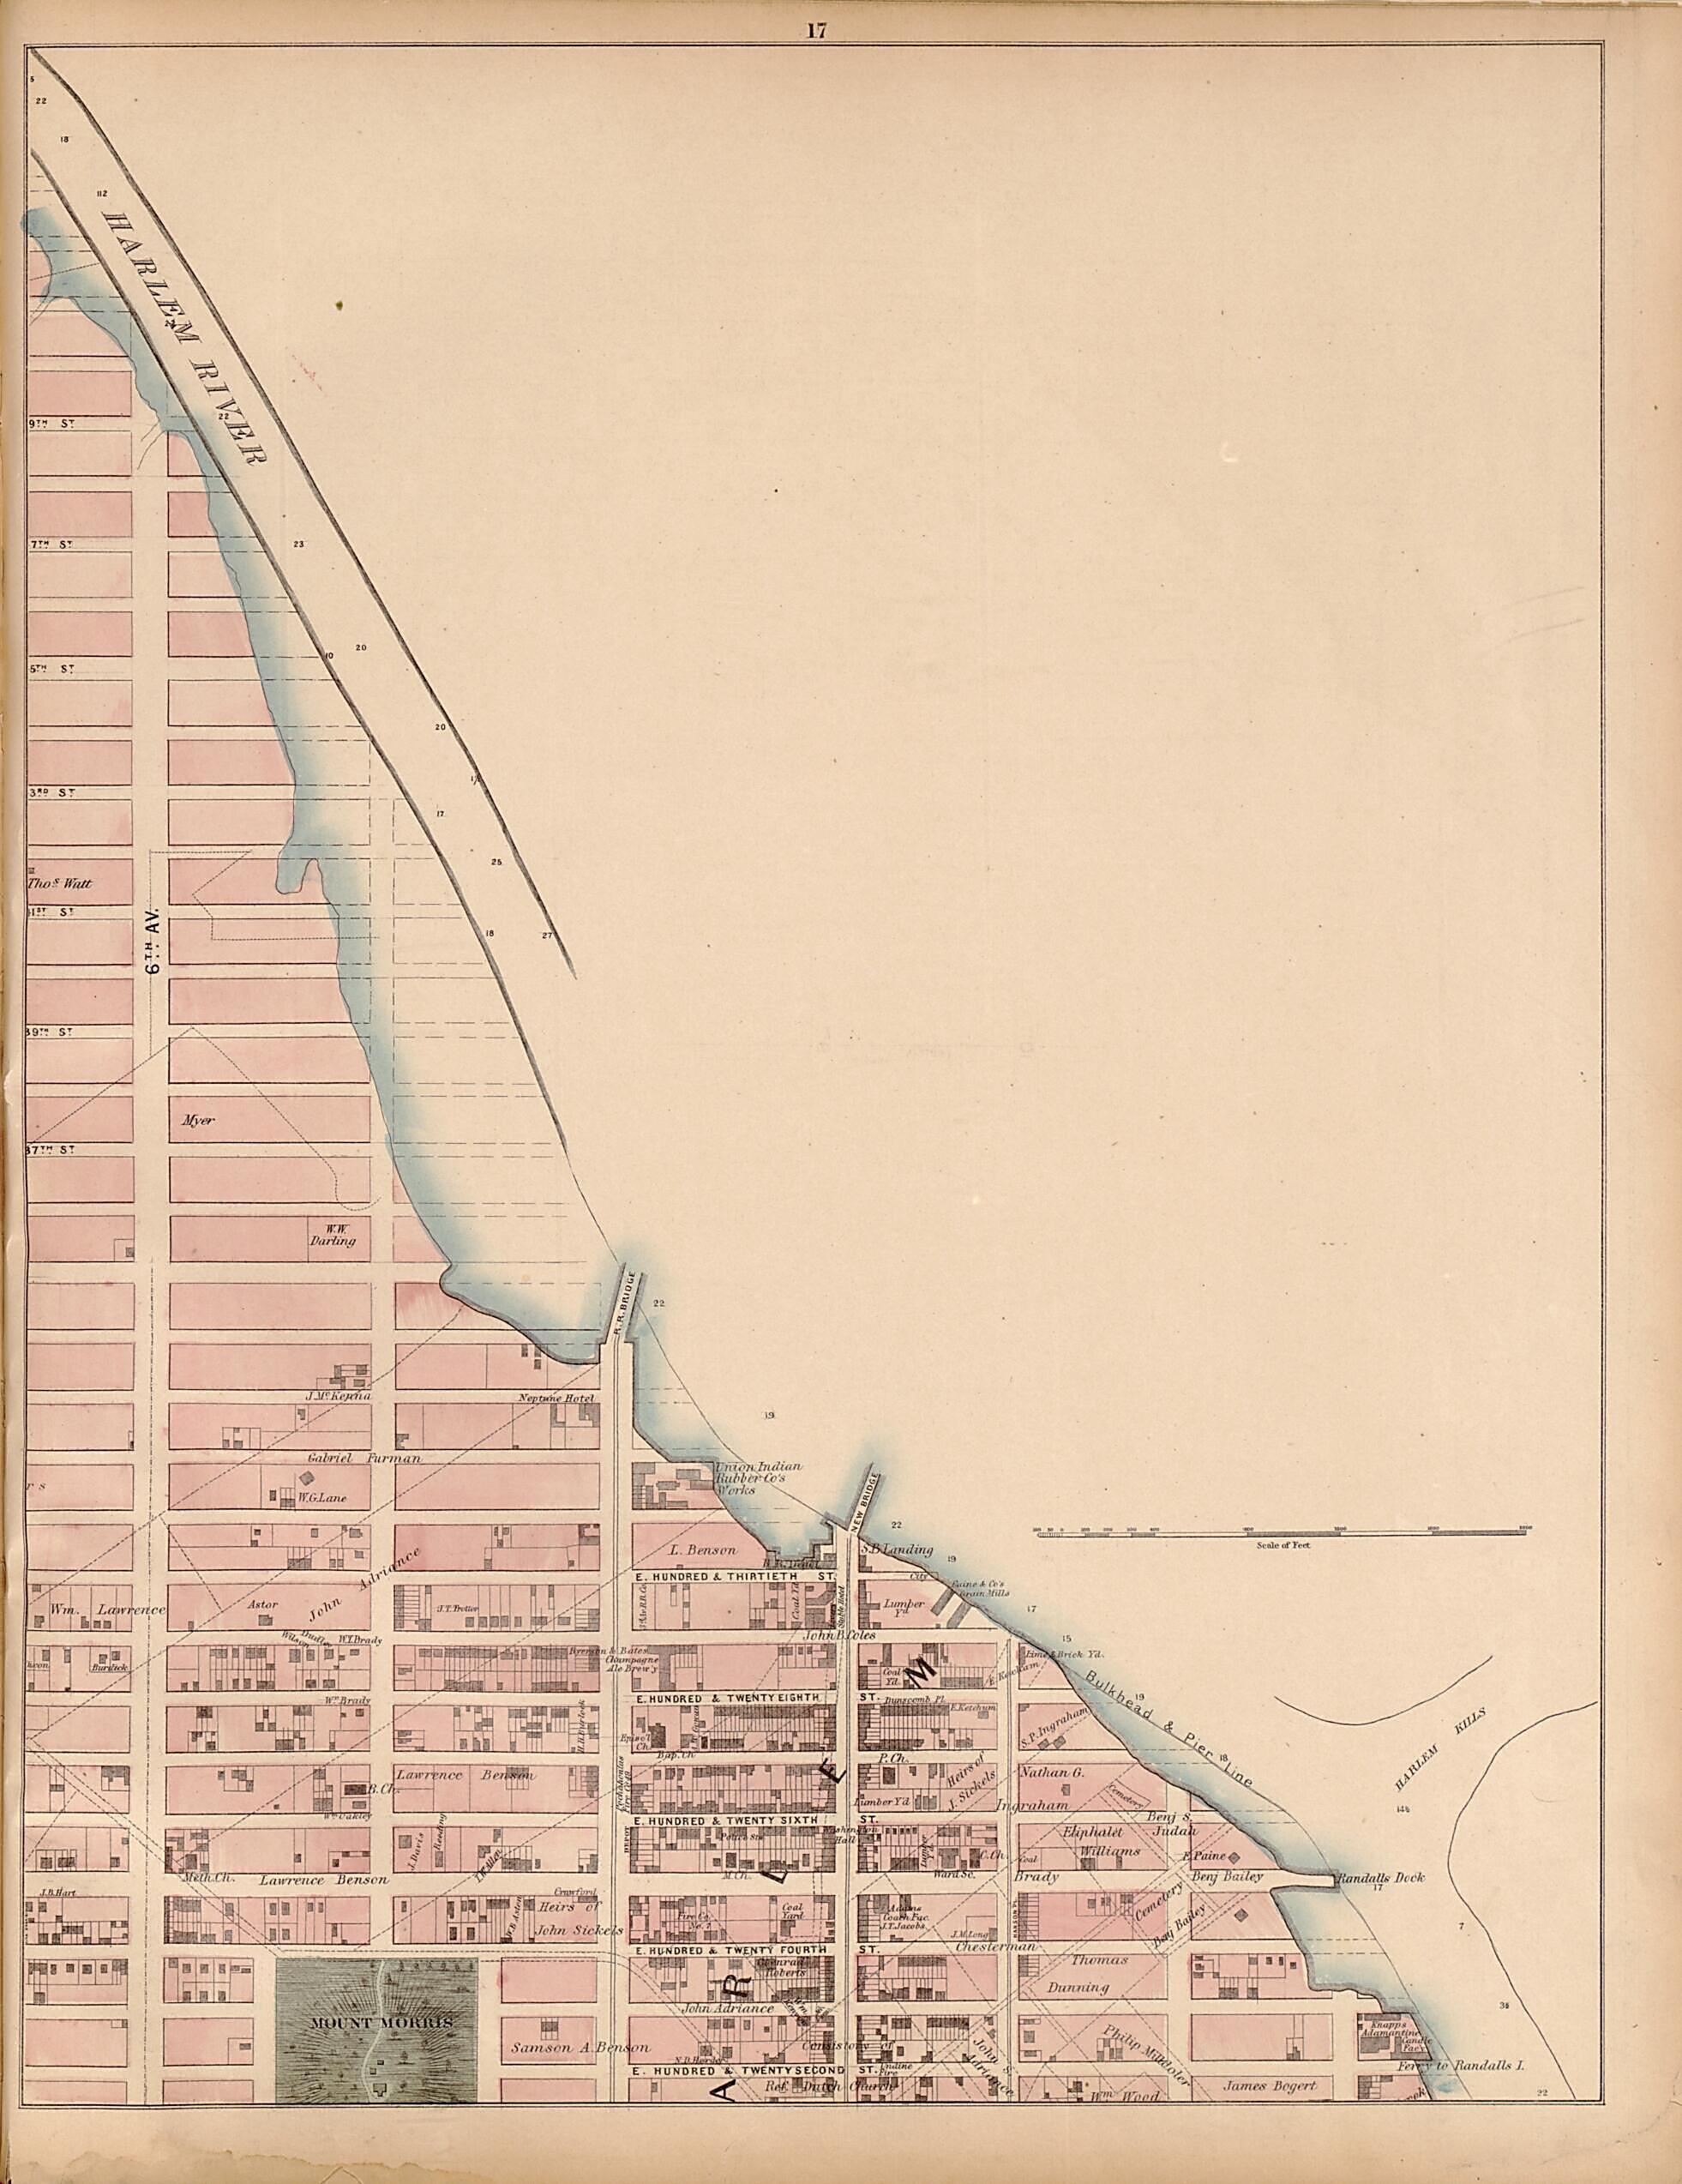 This old map of Plate 17 from Plan of New York City from the Battery to Spuyten Duyvil Creek from 1866 was created by John F. Harrison in 1866